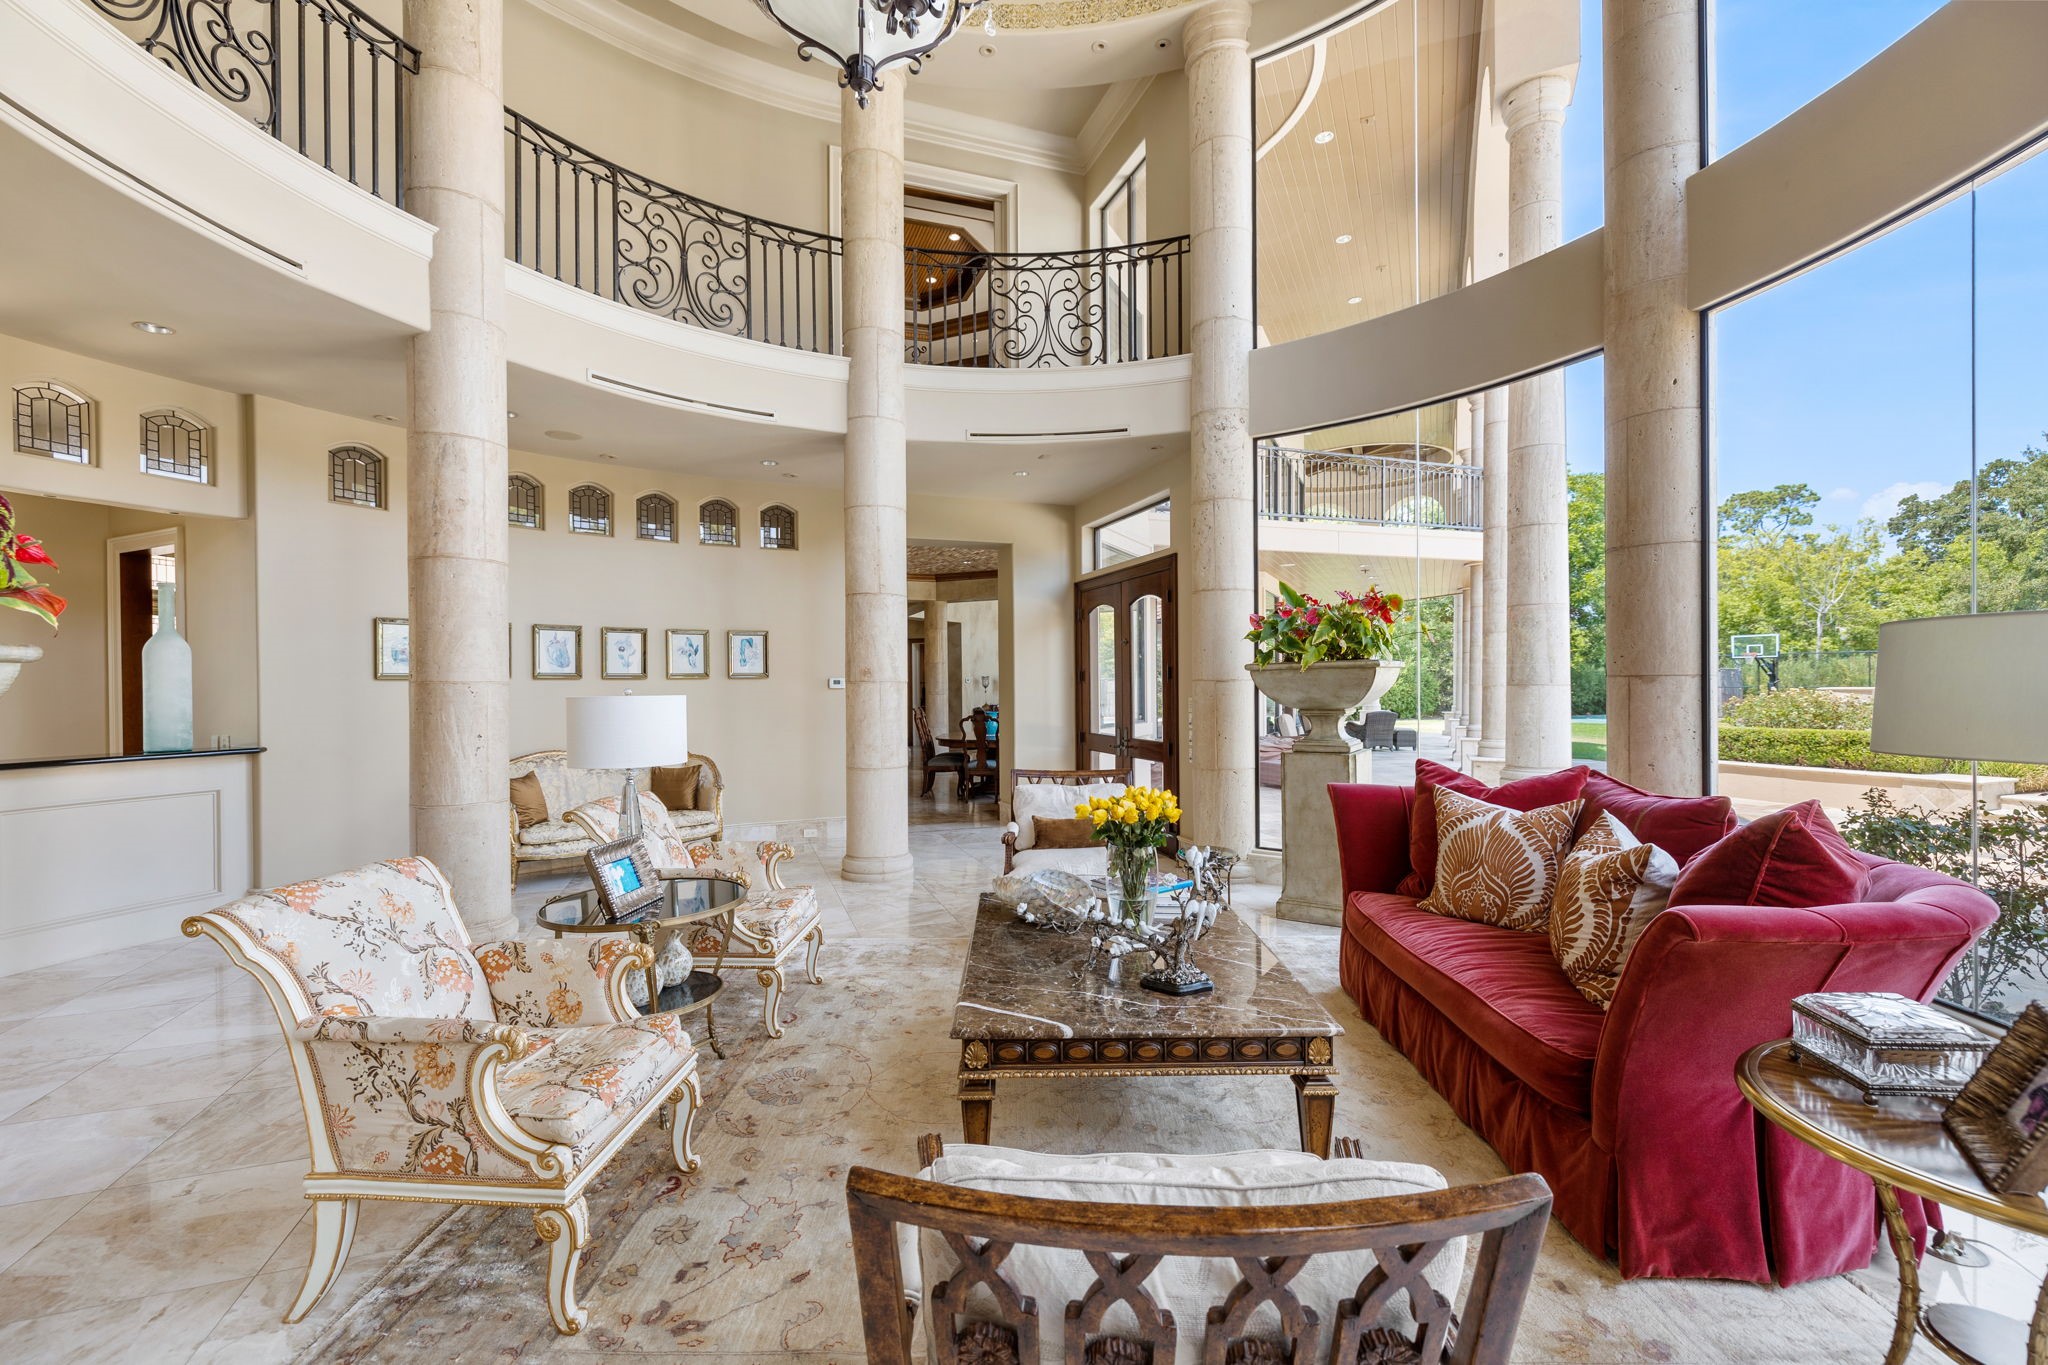 Within the Rotunda is the formal Living Room adorned with Baroque round stone columns, arched miniature leaded glass transom windows, and soaring double height butted glass windows with clear views of the clear Texas skies!